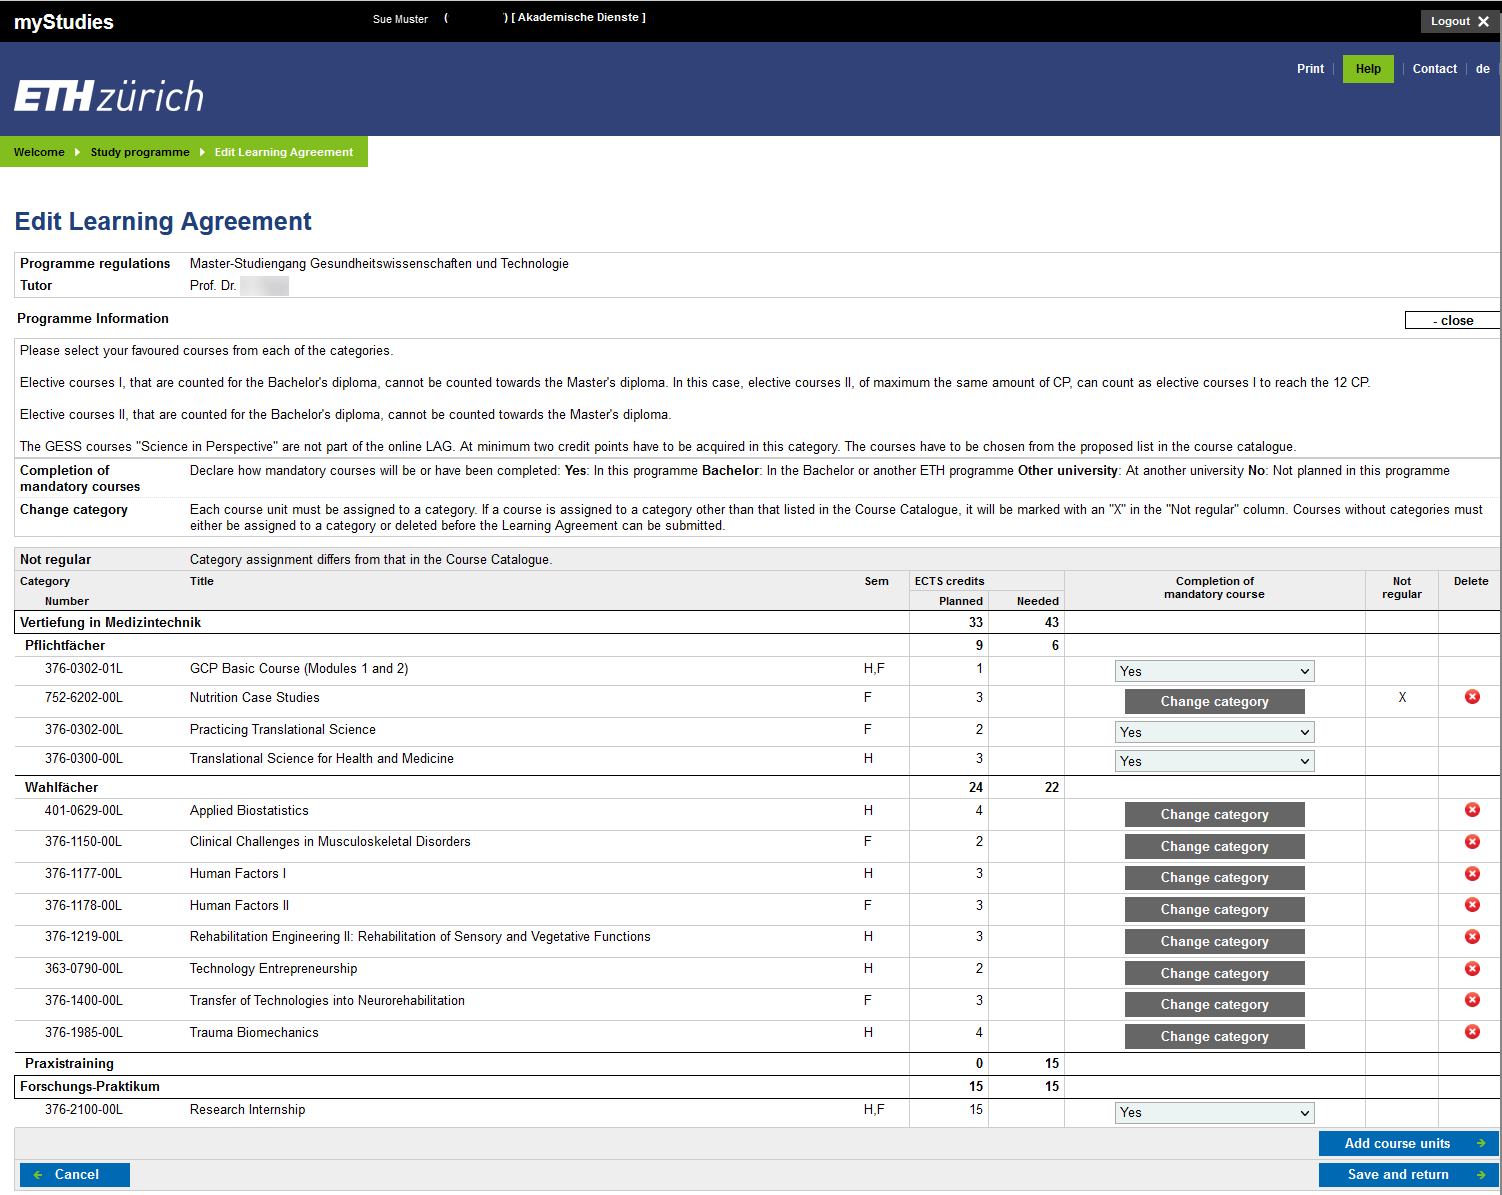 Enlarged view: A screenshot from myStudies is shown. The screenshot shows the editing of the Learning Agreement.